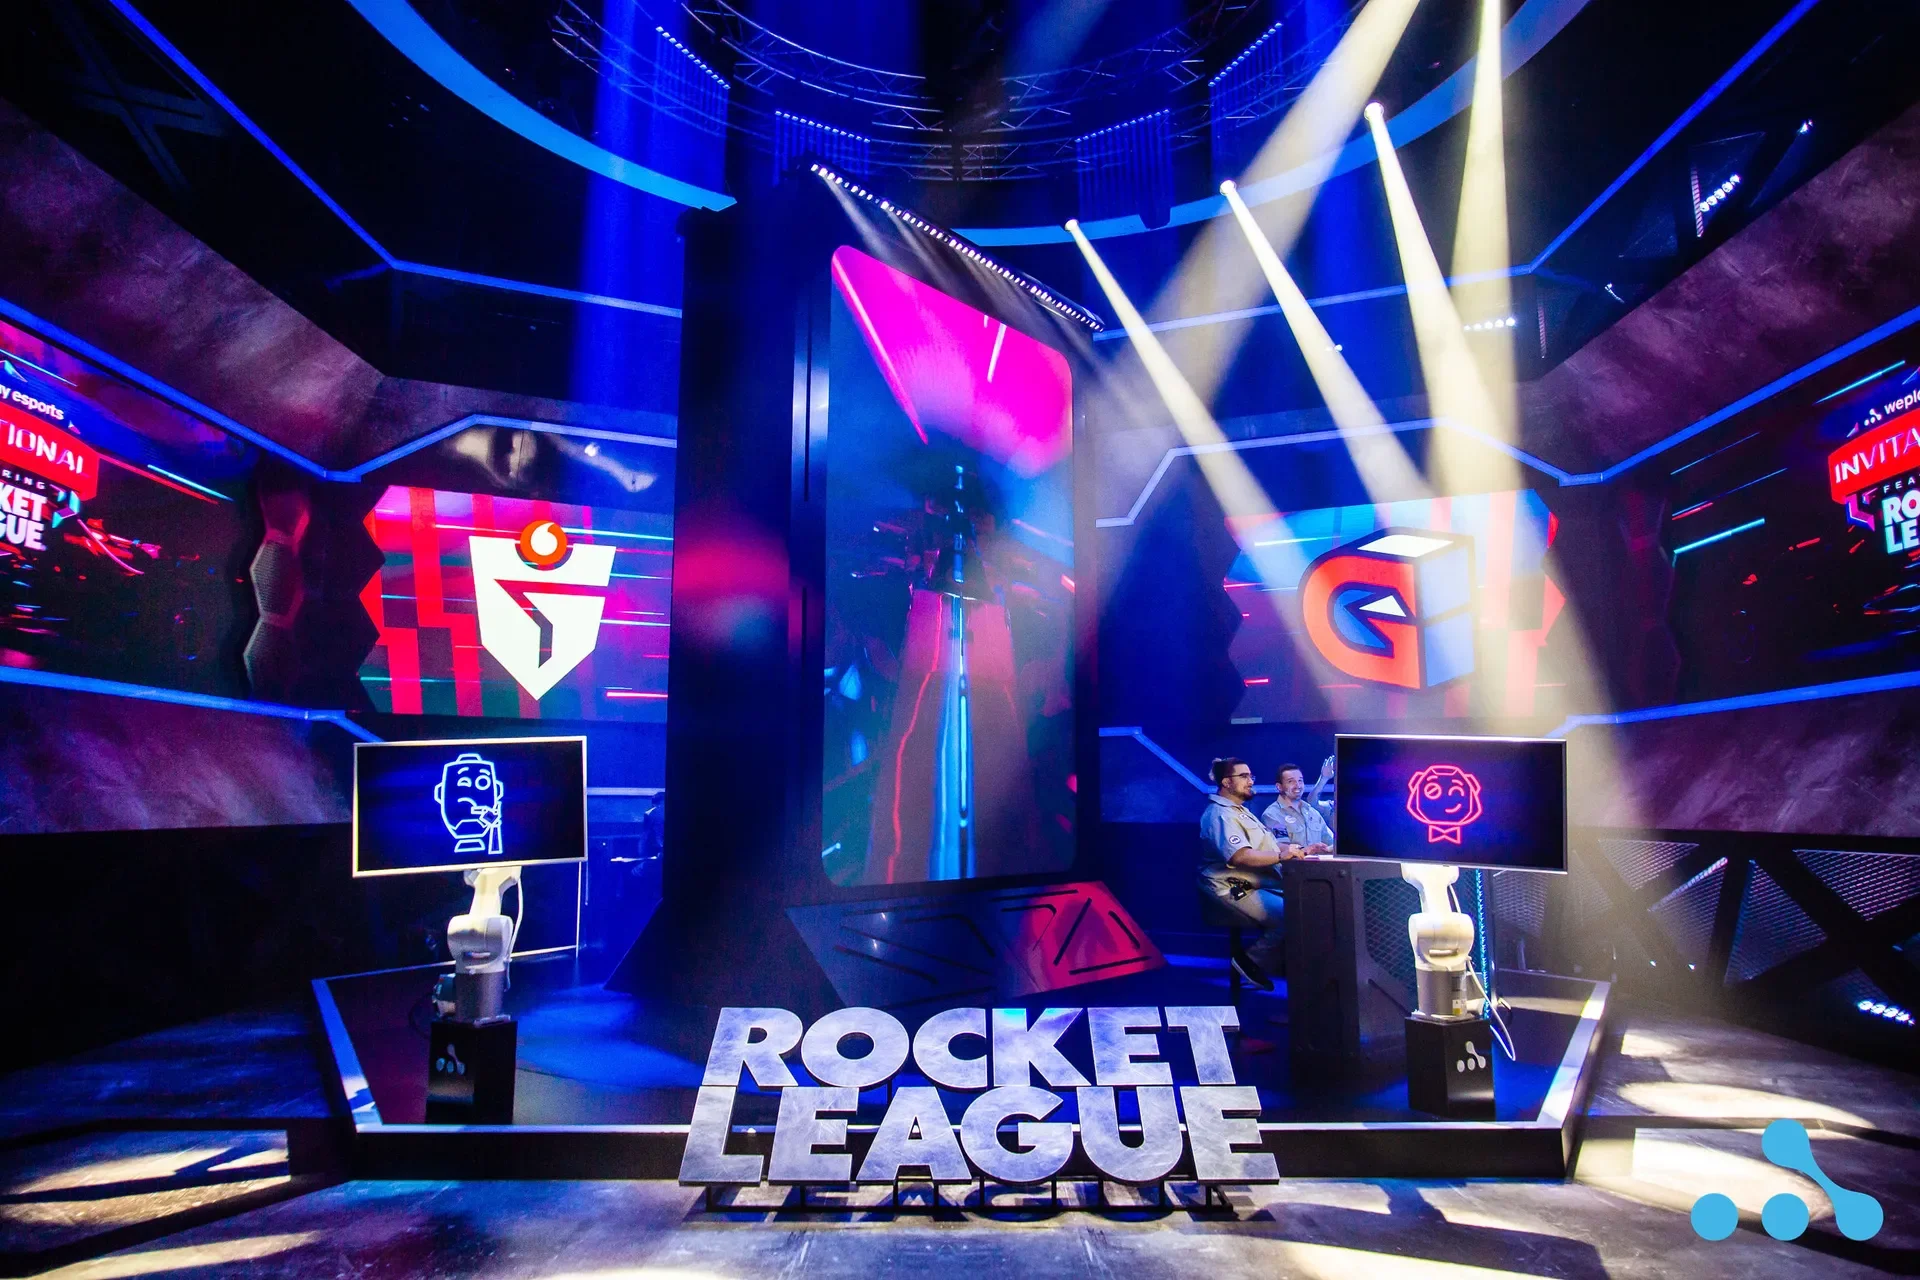 WePlay Esports Invitational featuring Rocket League car racing world. Credit: WePlay Holding